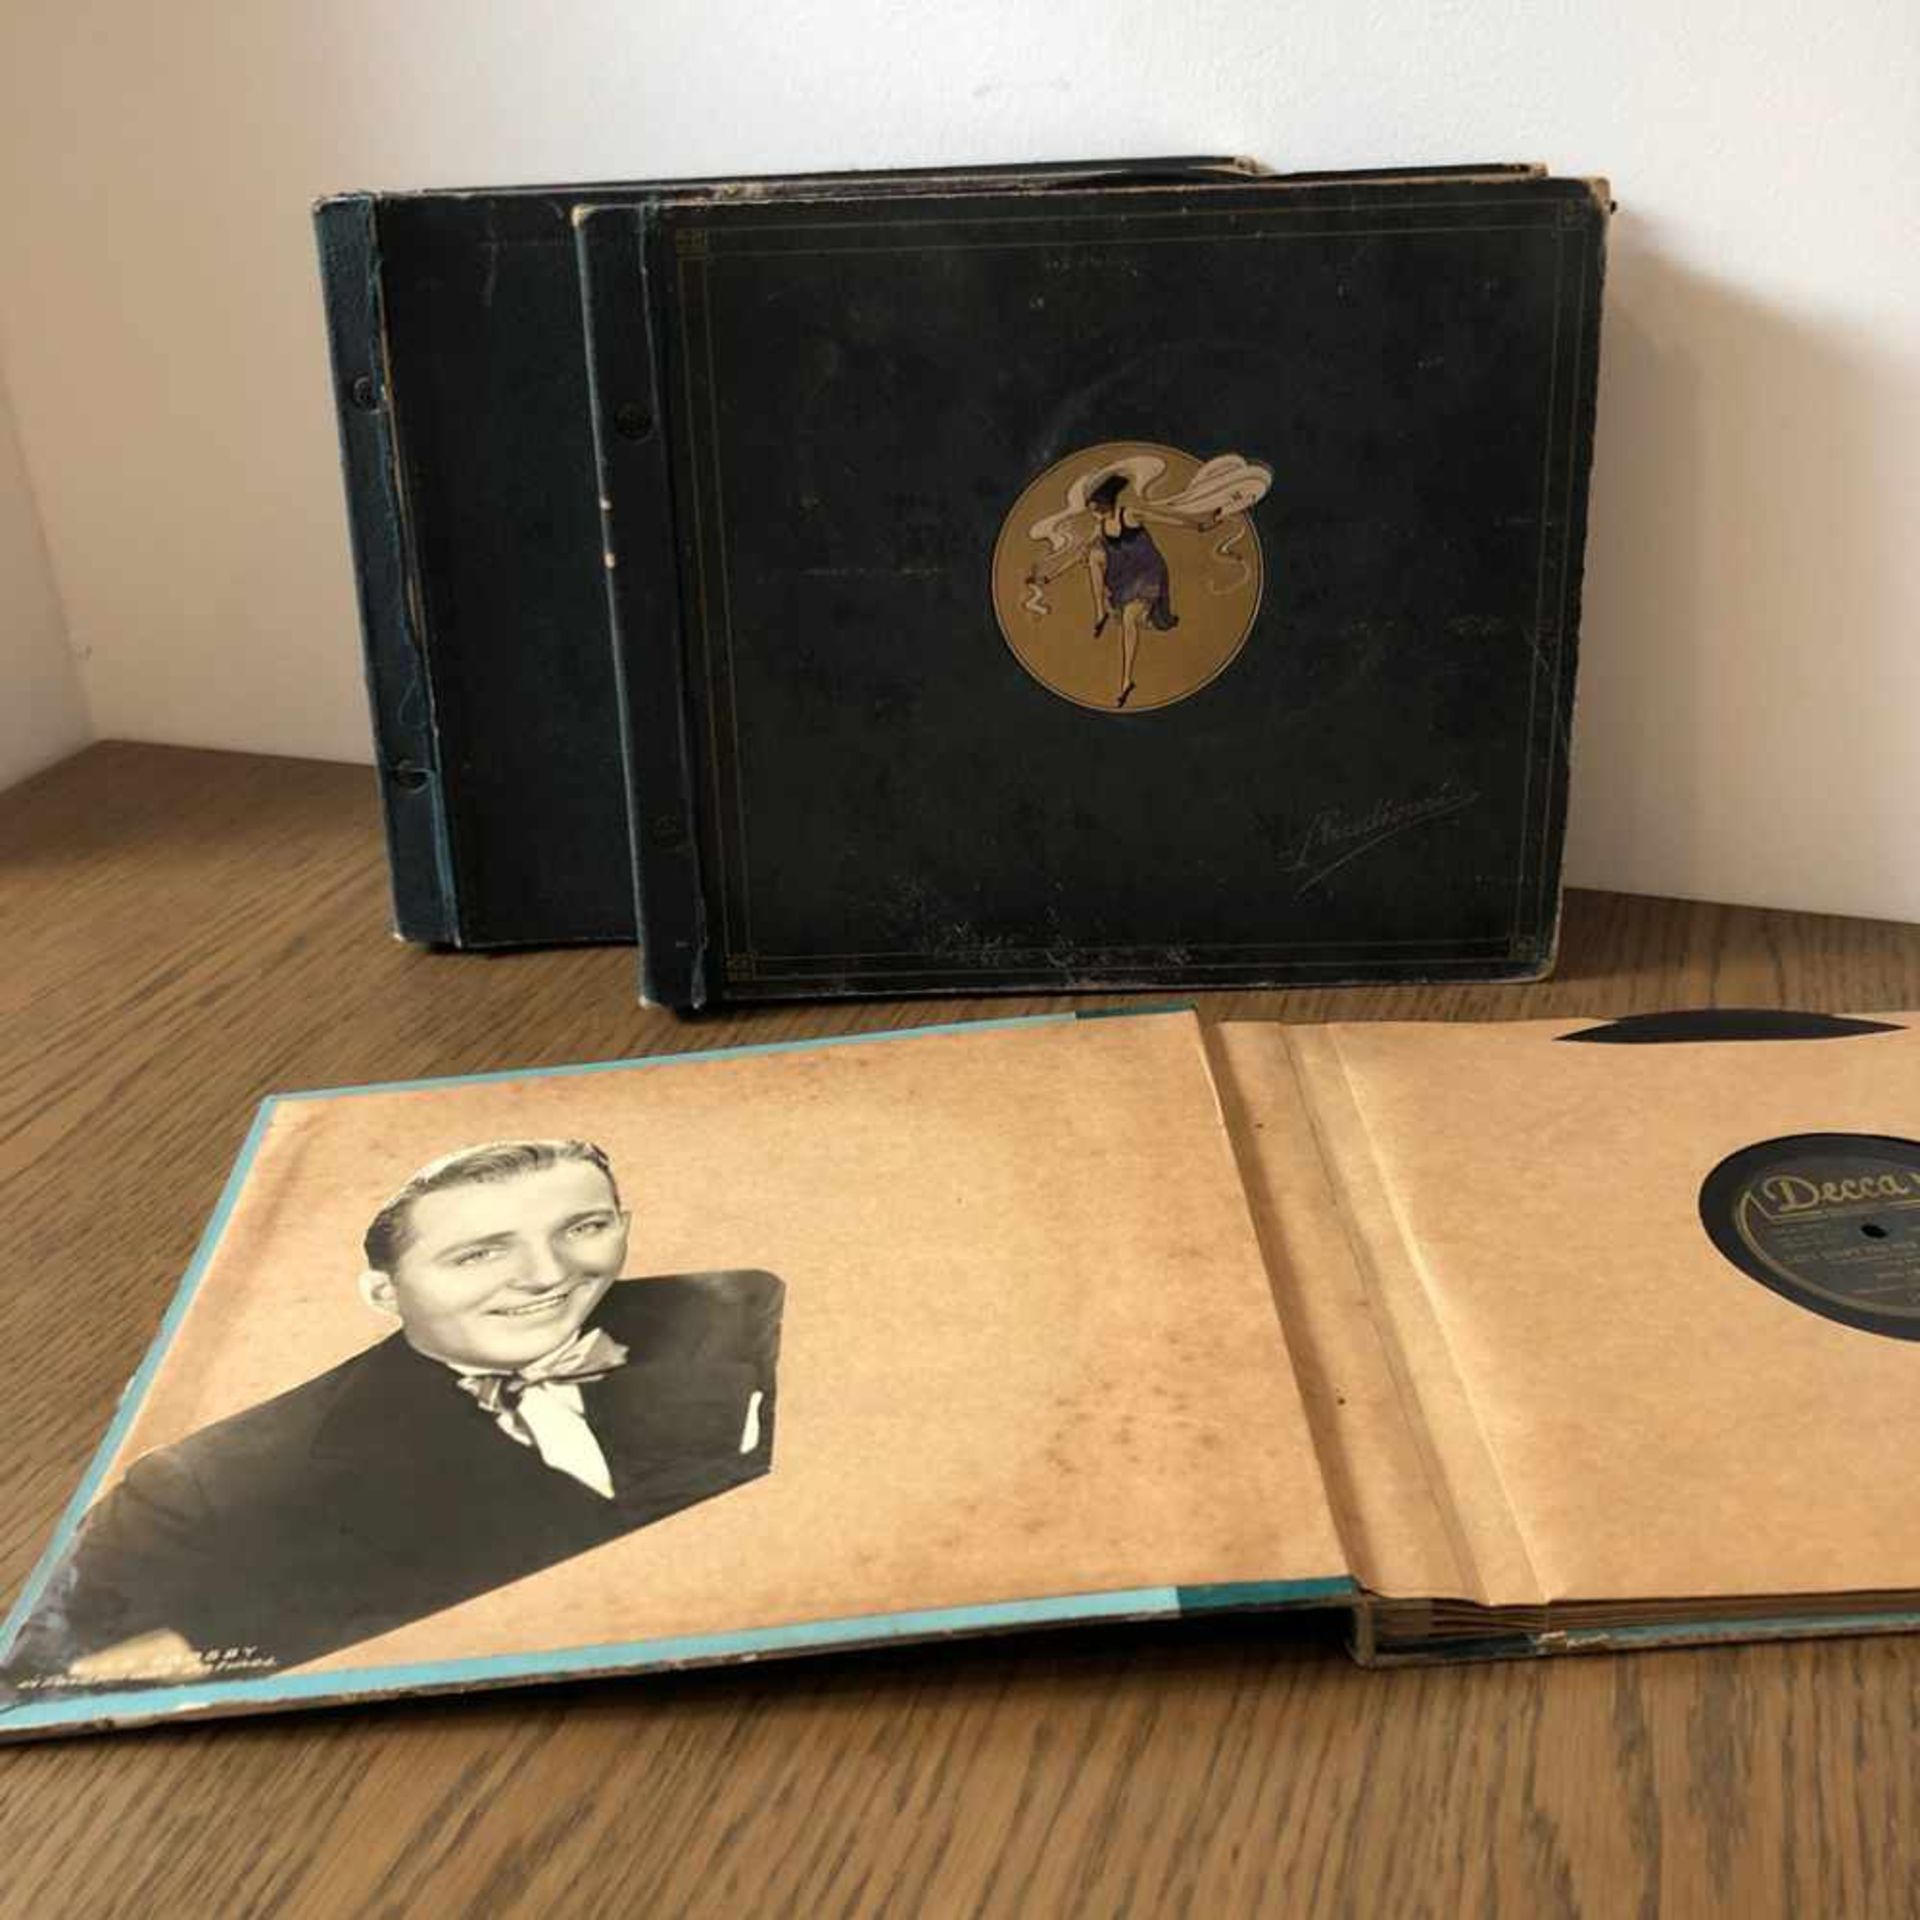 Set of 3 albums with 78RPM recordsSet of 3 albums with 78RPM record's from the US of Bing Crosby and - Image 2 of 9